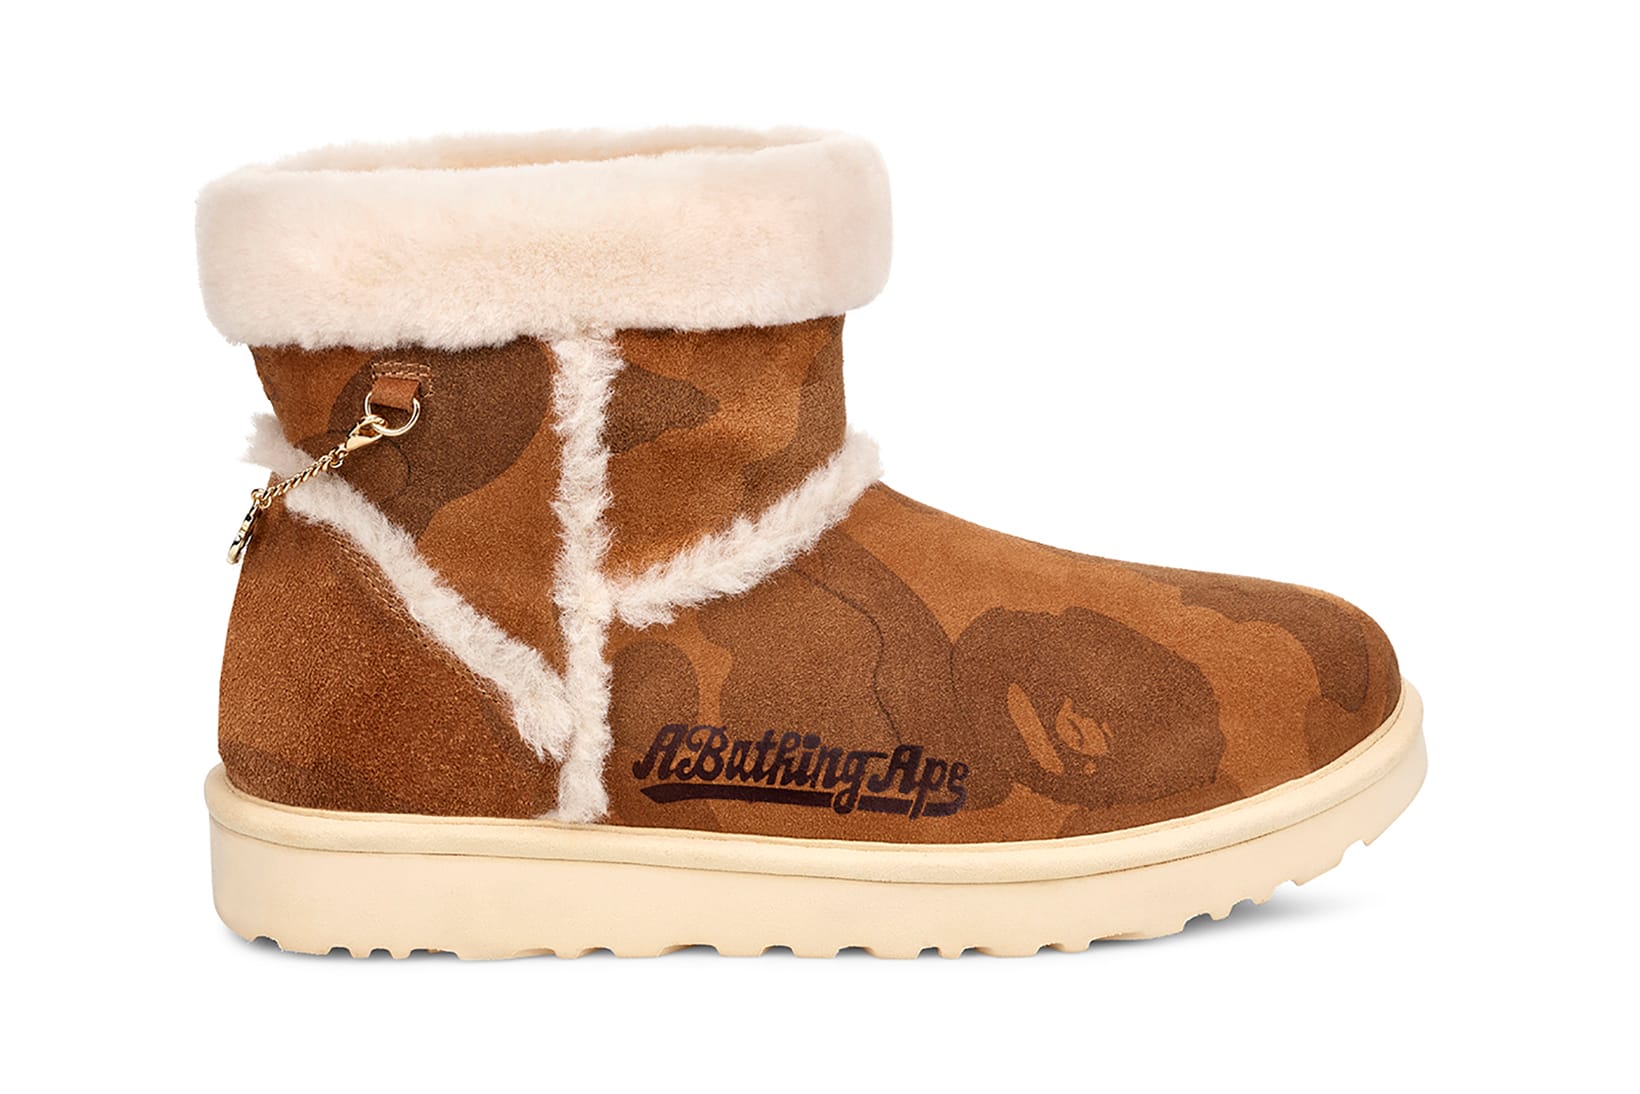 ugg boots fall 2019